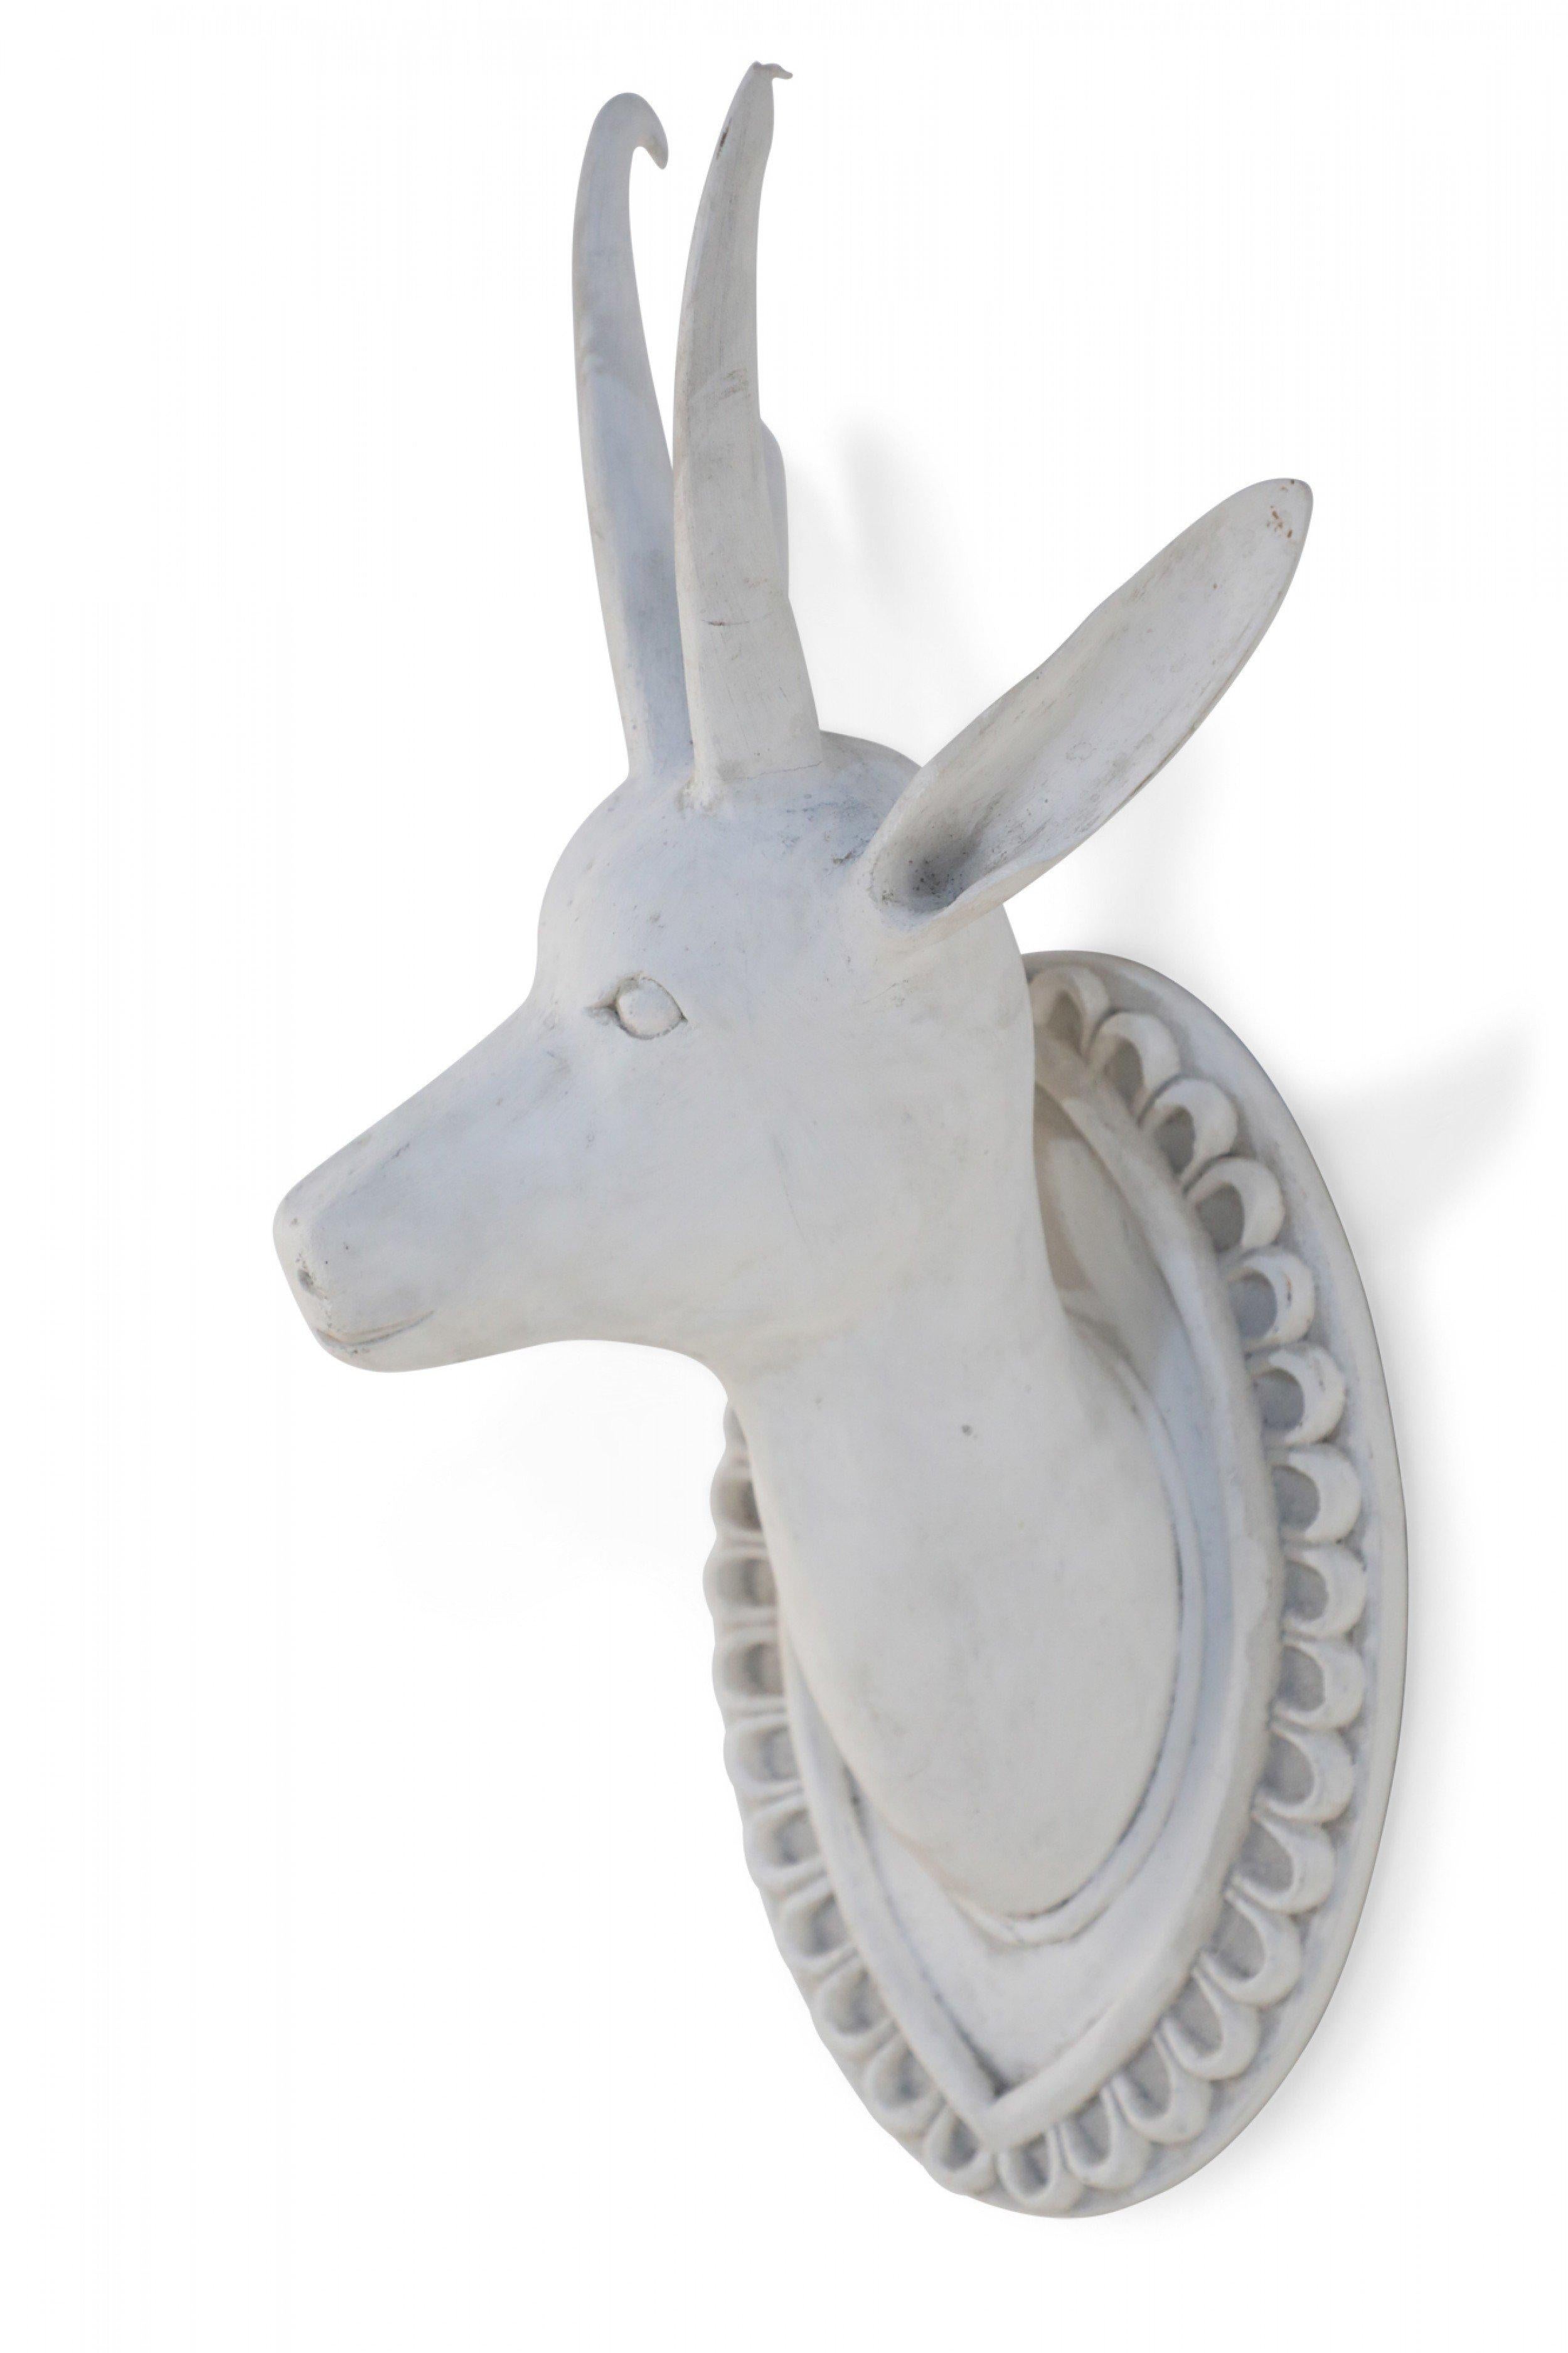 Chinese mid century hand-carved, white gesso wall plaque depicting a horned goat head emerging from an ornamental plaque.